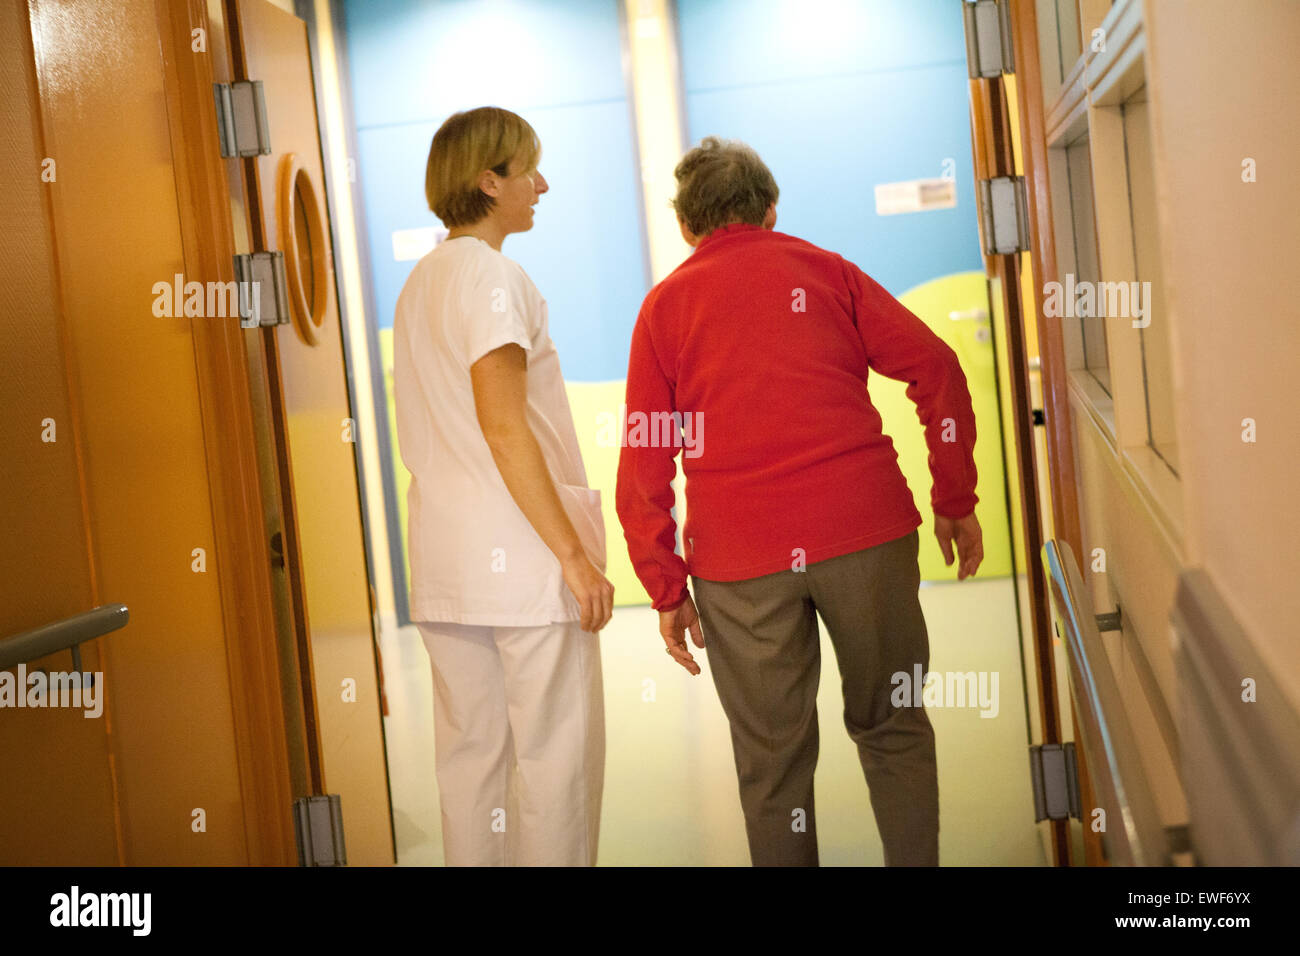 OCCUPATIONAL THERAPY Stock Photo